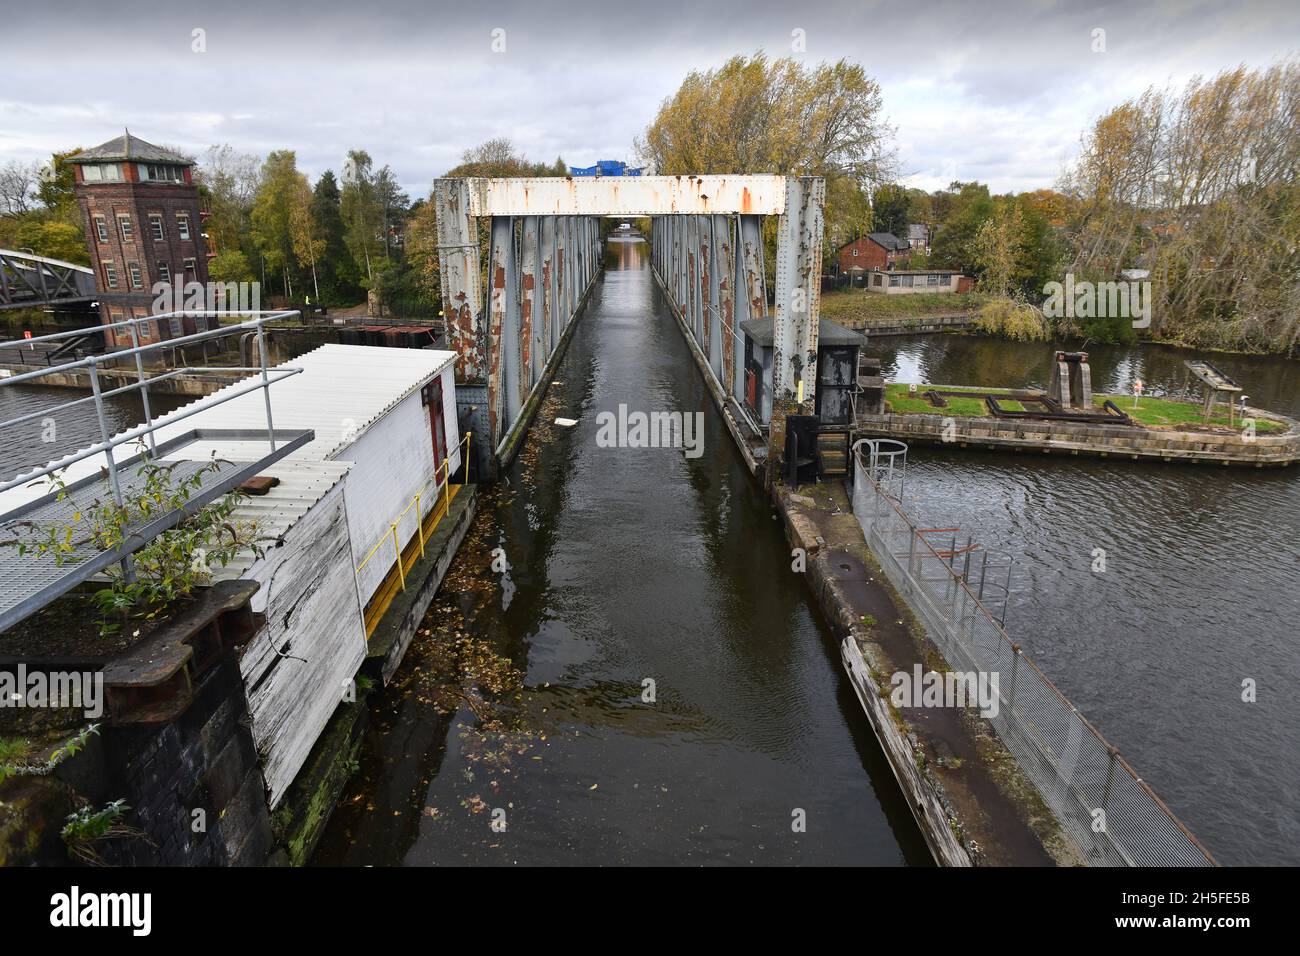 The Barton Swing Aqueduct  a moveable navigable aqueduct carrying the  Bridgewater Canal across the Manchester Ship Canal in Barton upon Irwell, Great Stock Photo